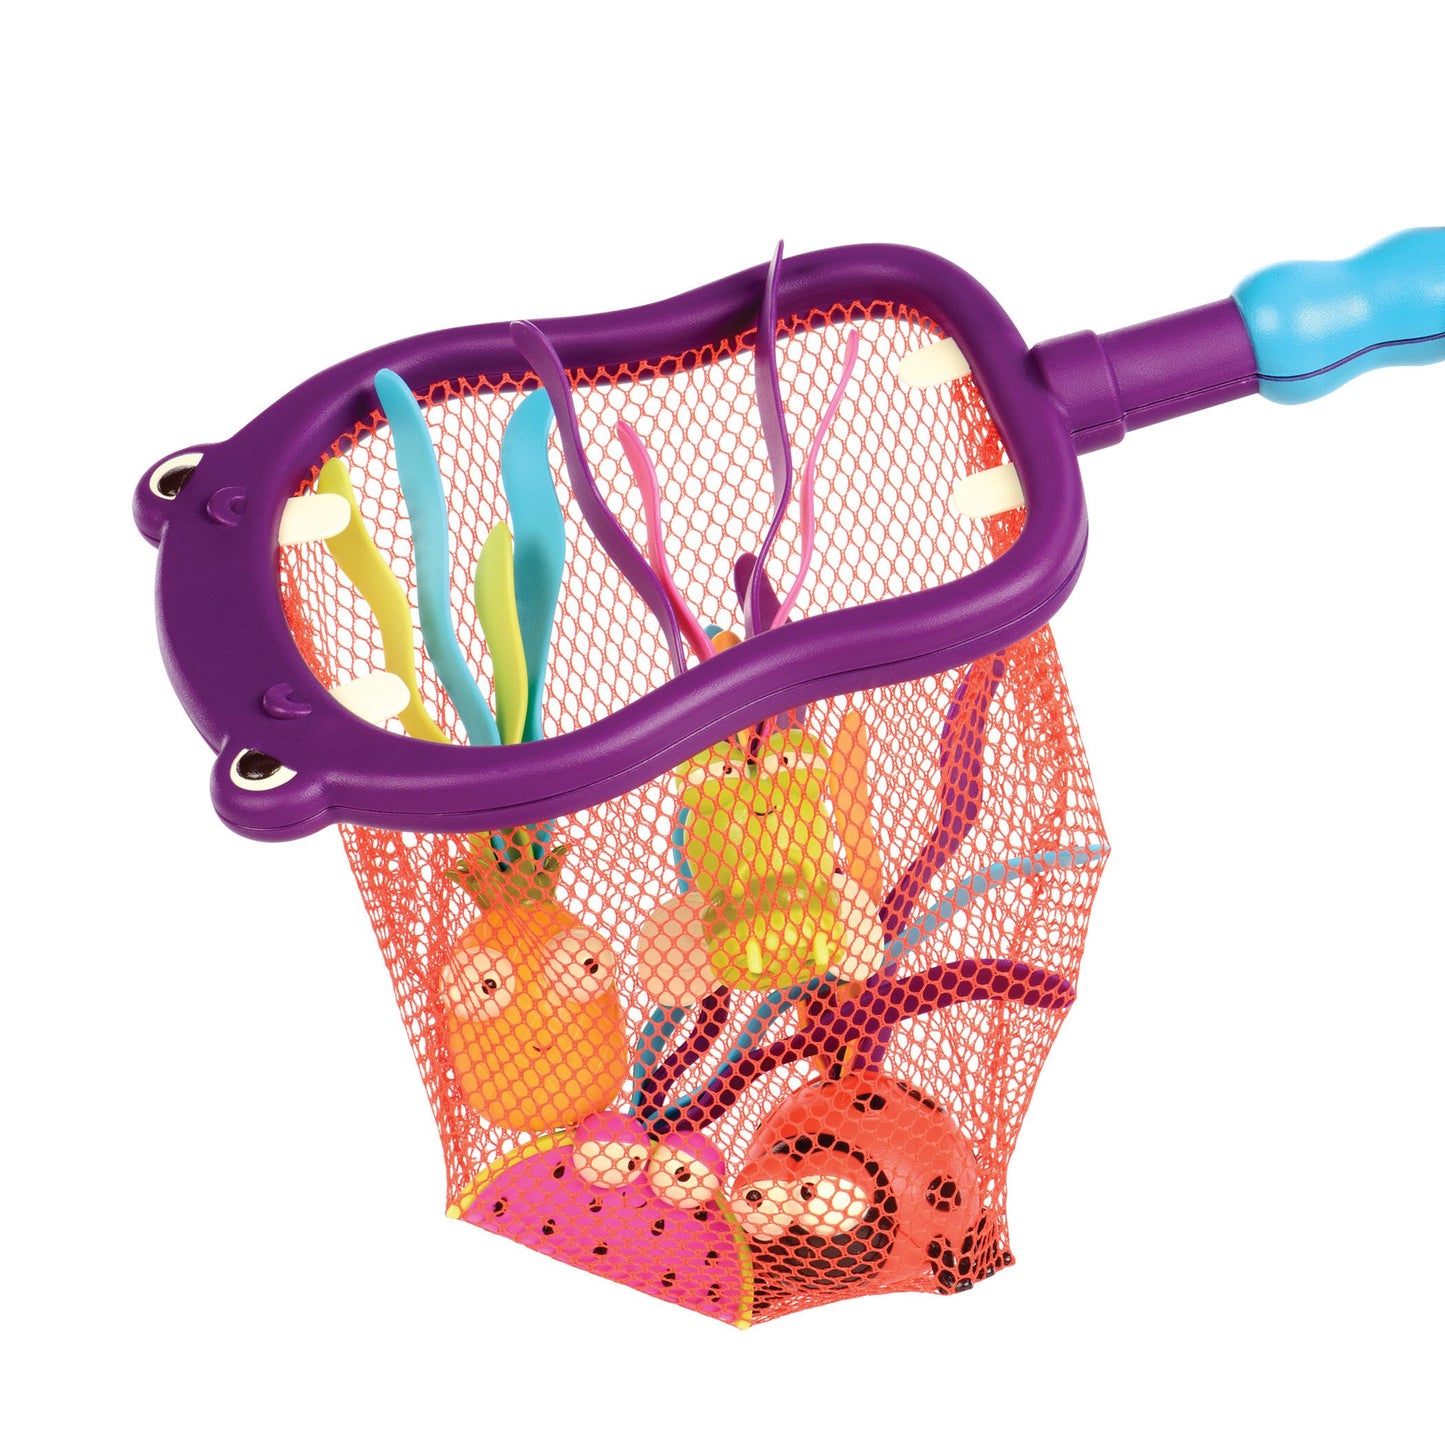 B. toys by Battat B. toys – Hippo Scoop-A-Diving Pool Toys - 1 Hippo Net & 4 Water Toys for Kids 3+ (5Piece), purple Hippo Diving Set